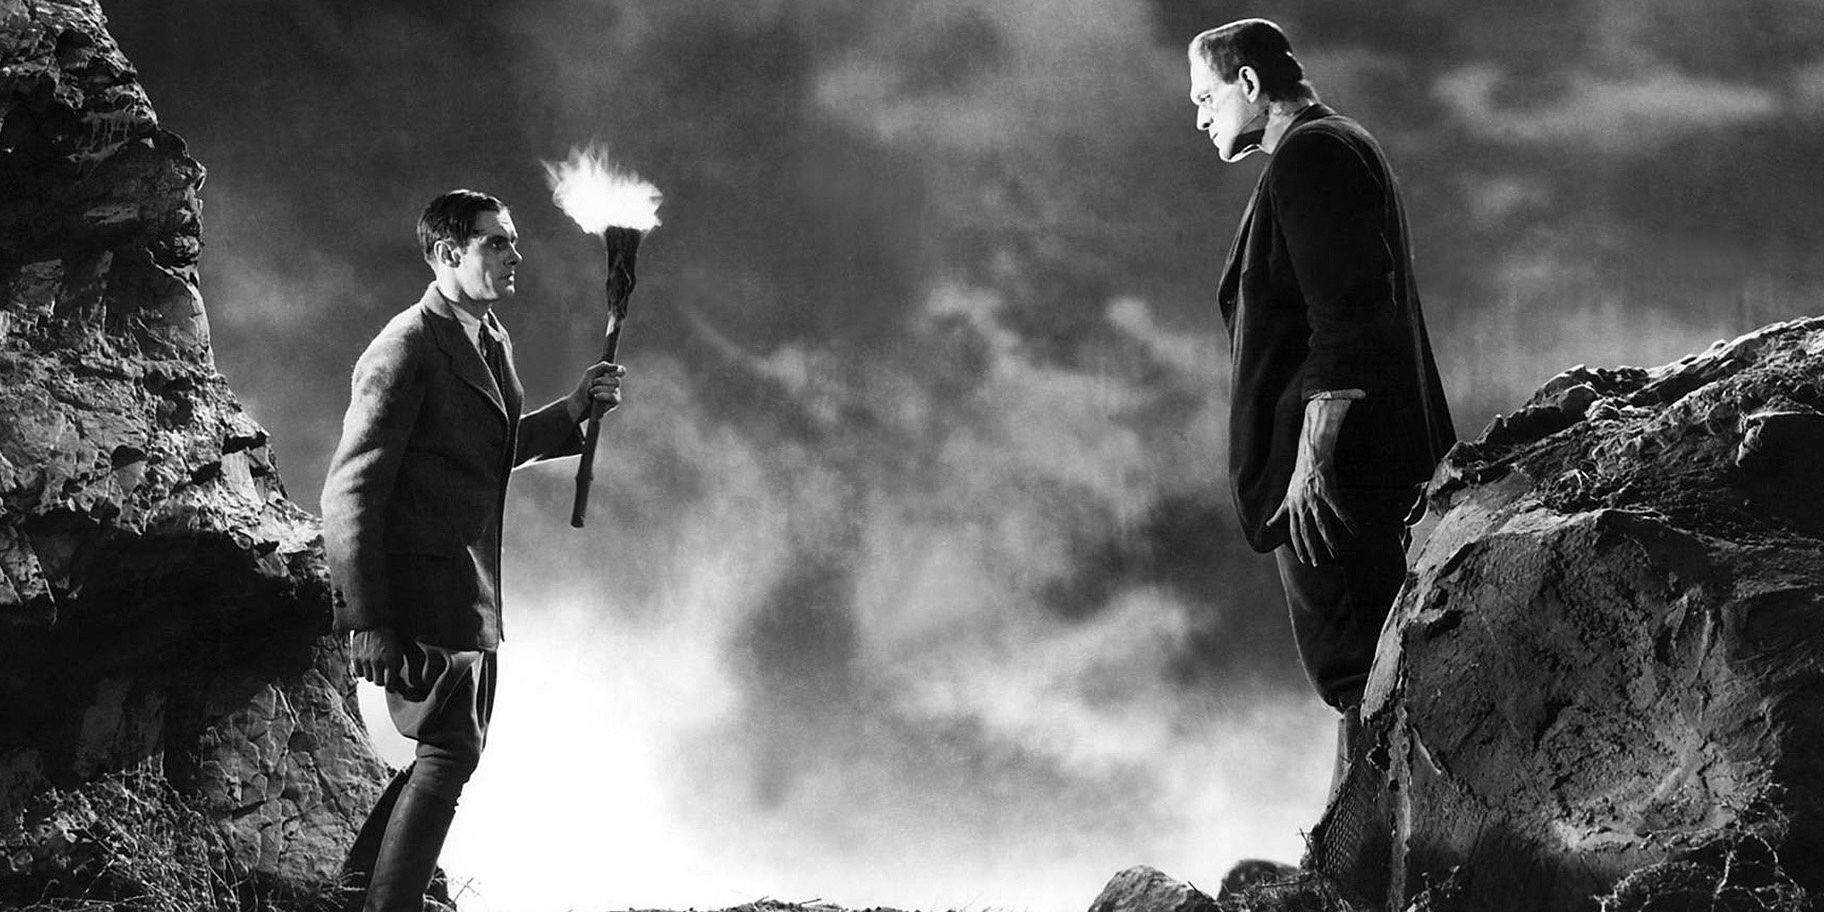 Boris Karloff's Monster faces off against a man with a torch in 1931's Frankenstein